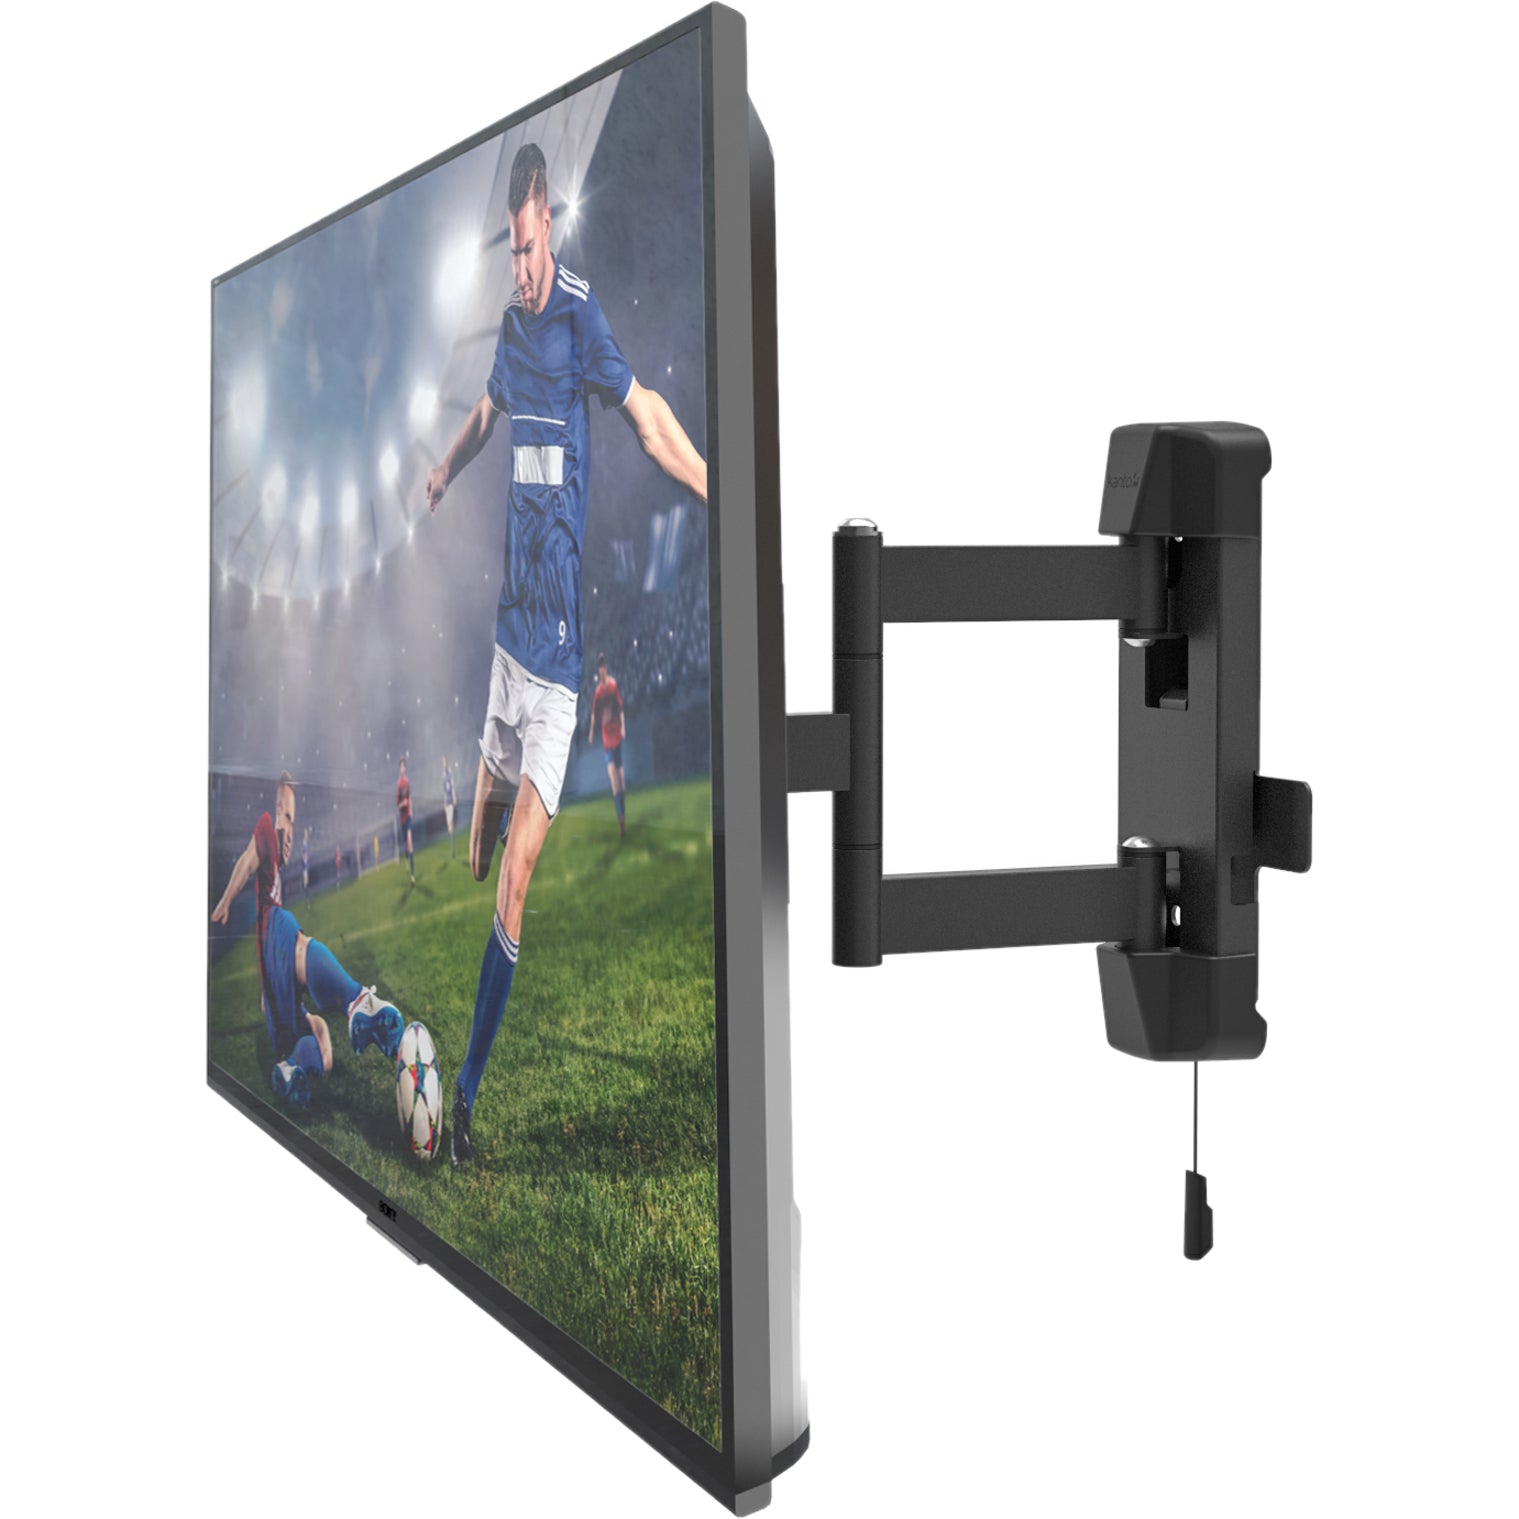 Kanto Full Motion Indoor/Outdoor TV Mount - Black [Discontinued]